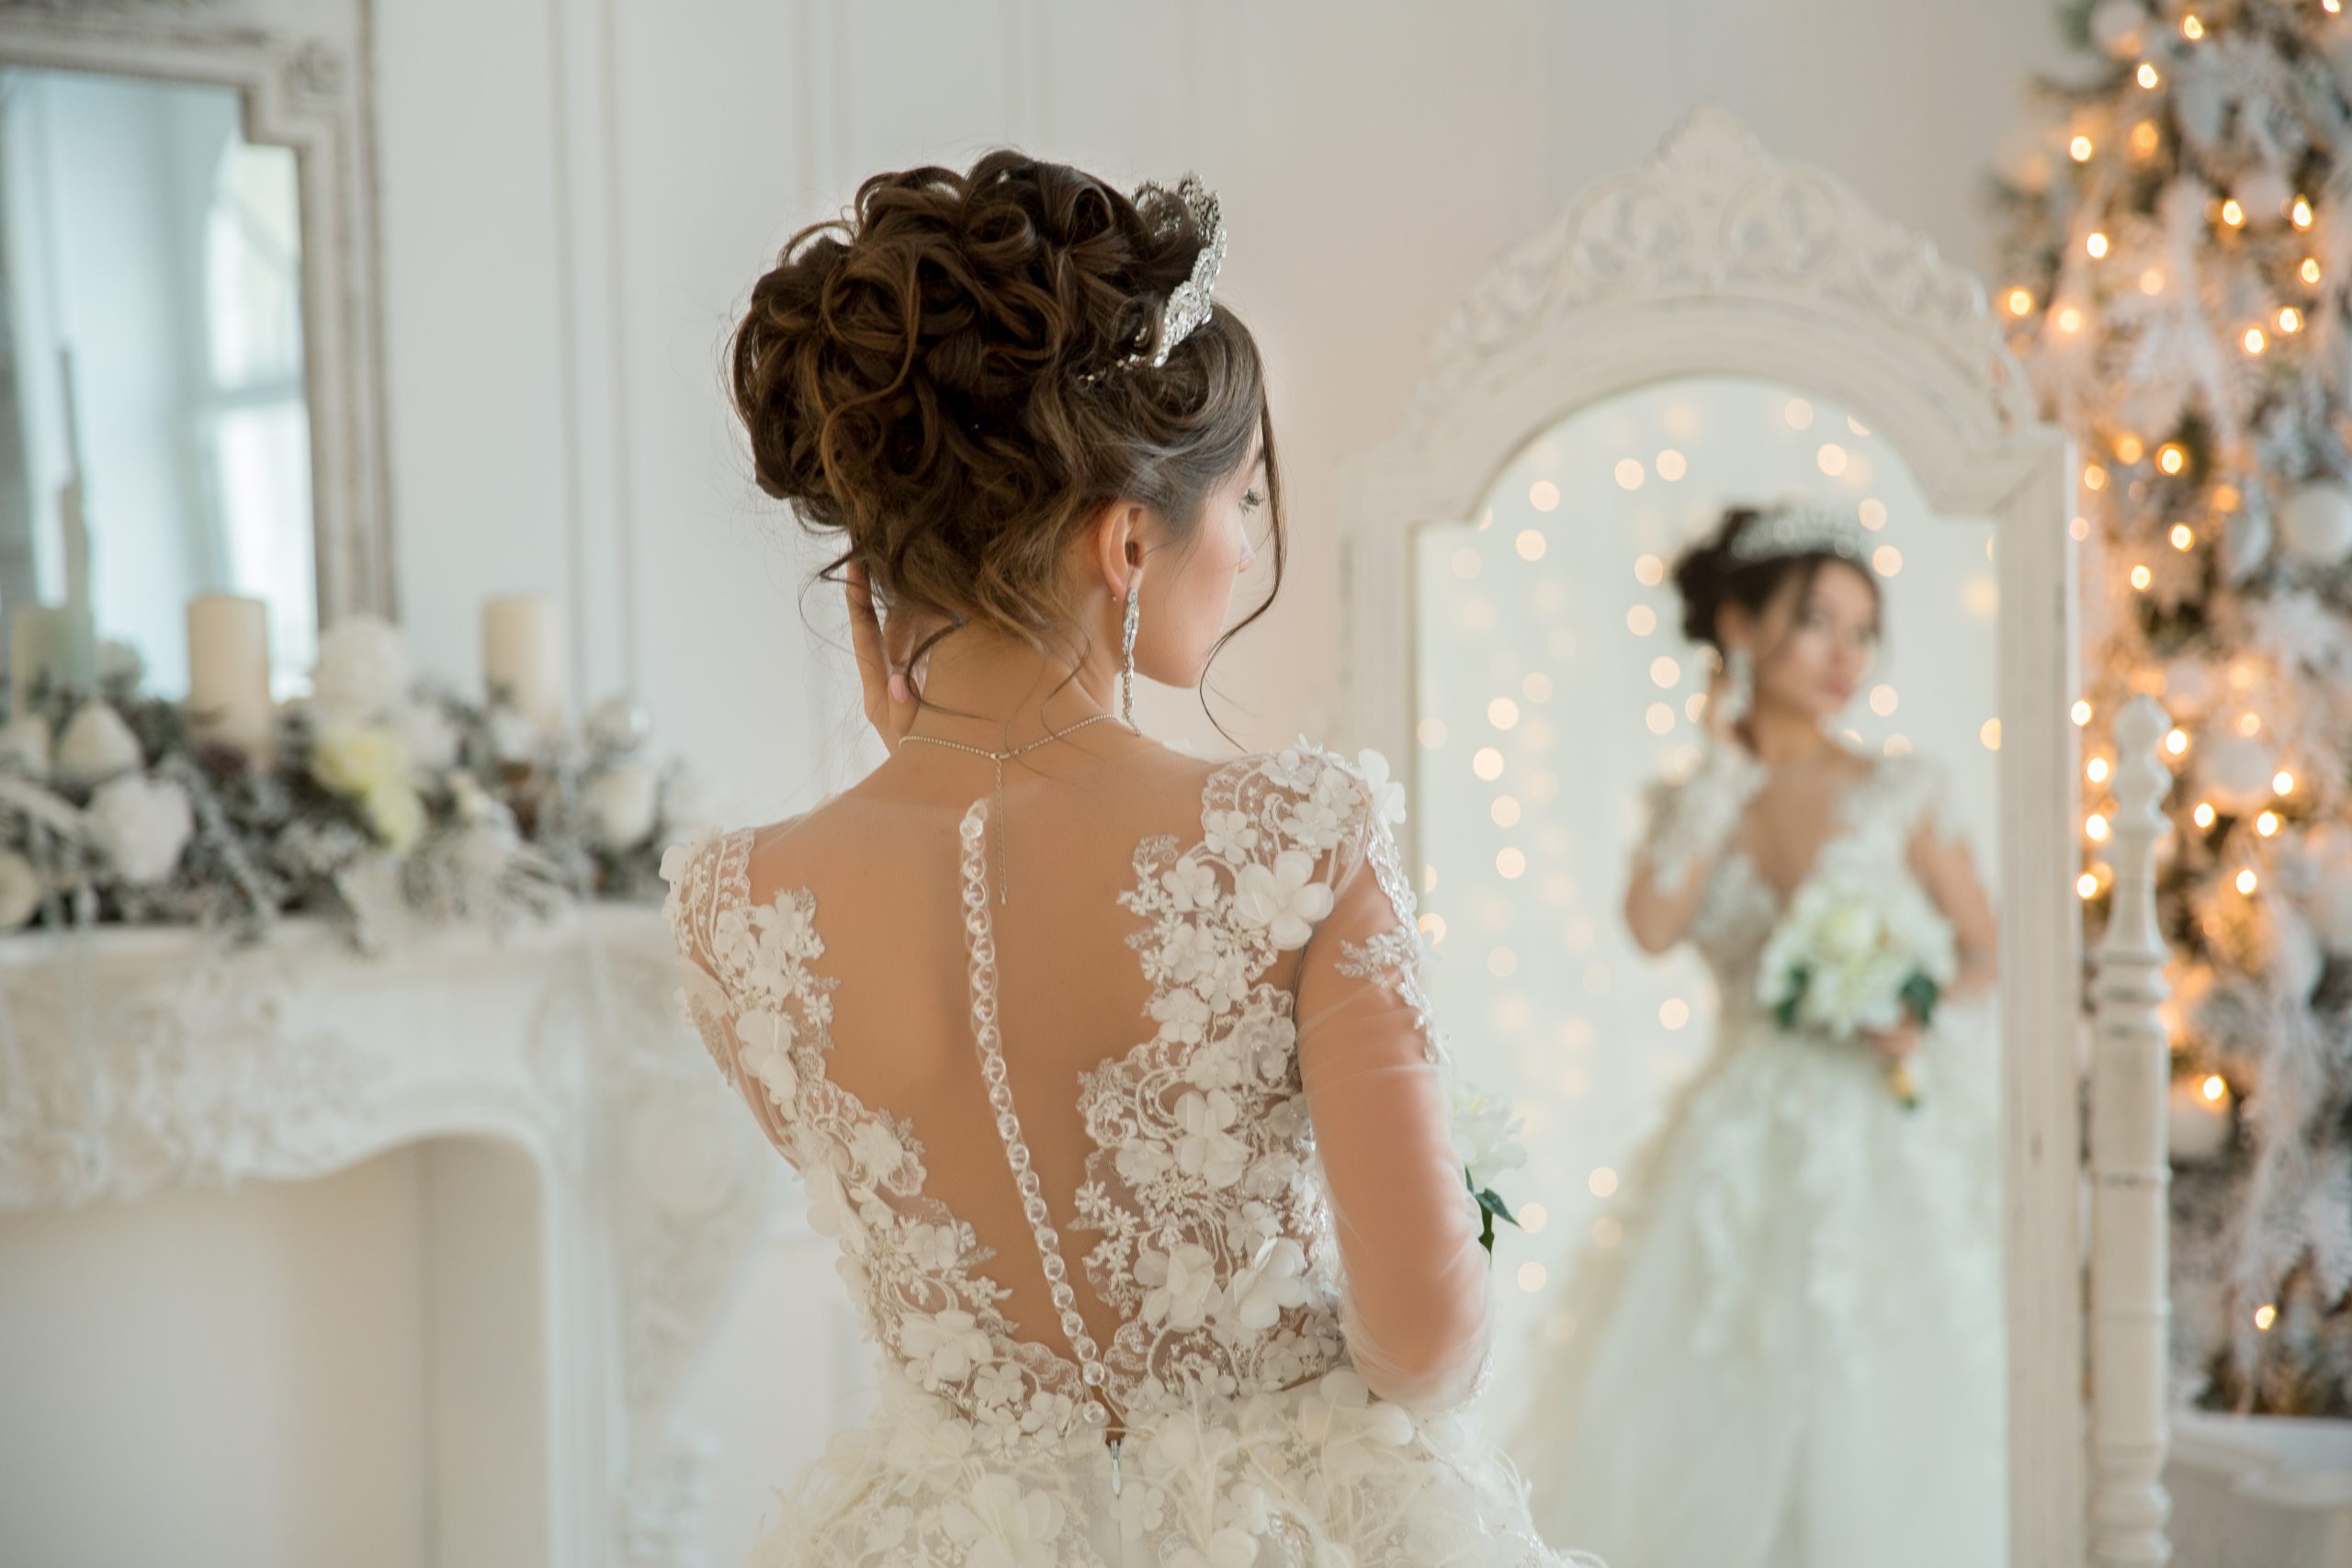 Beautiful bride in a wedding dress at a mirror in Christmas. Gir